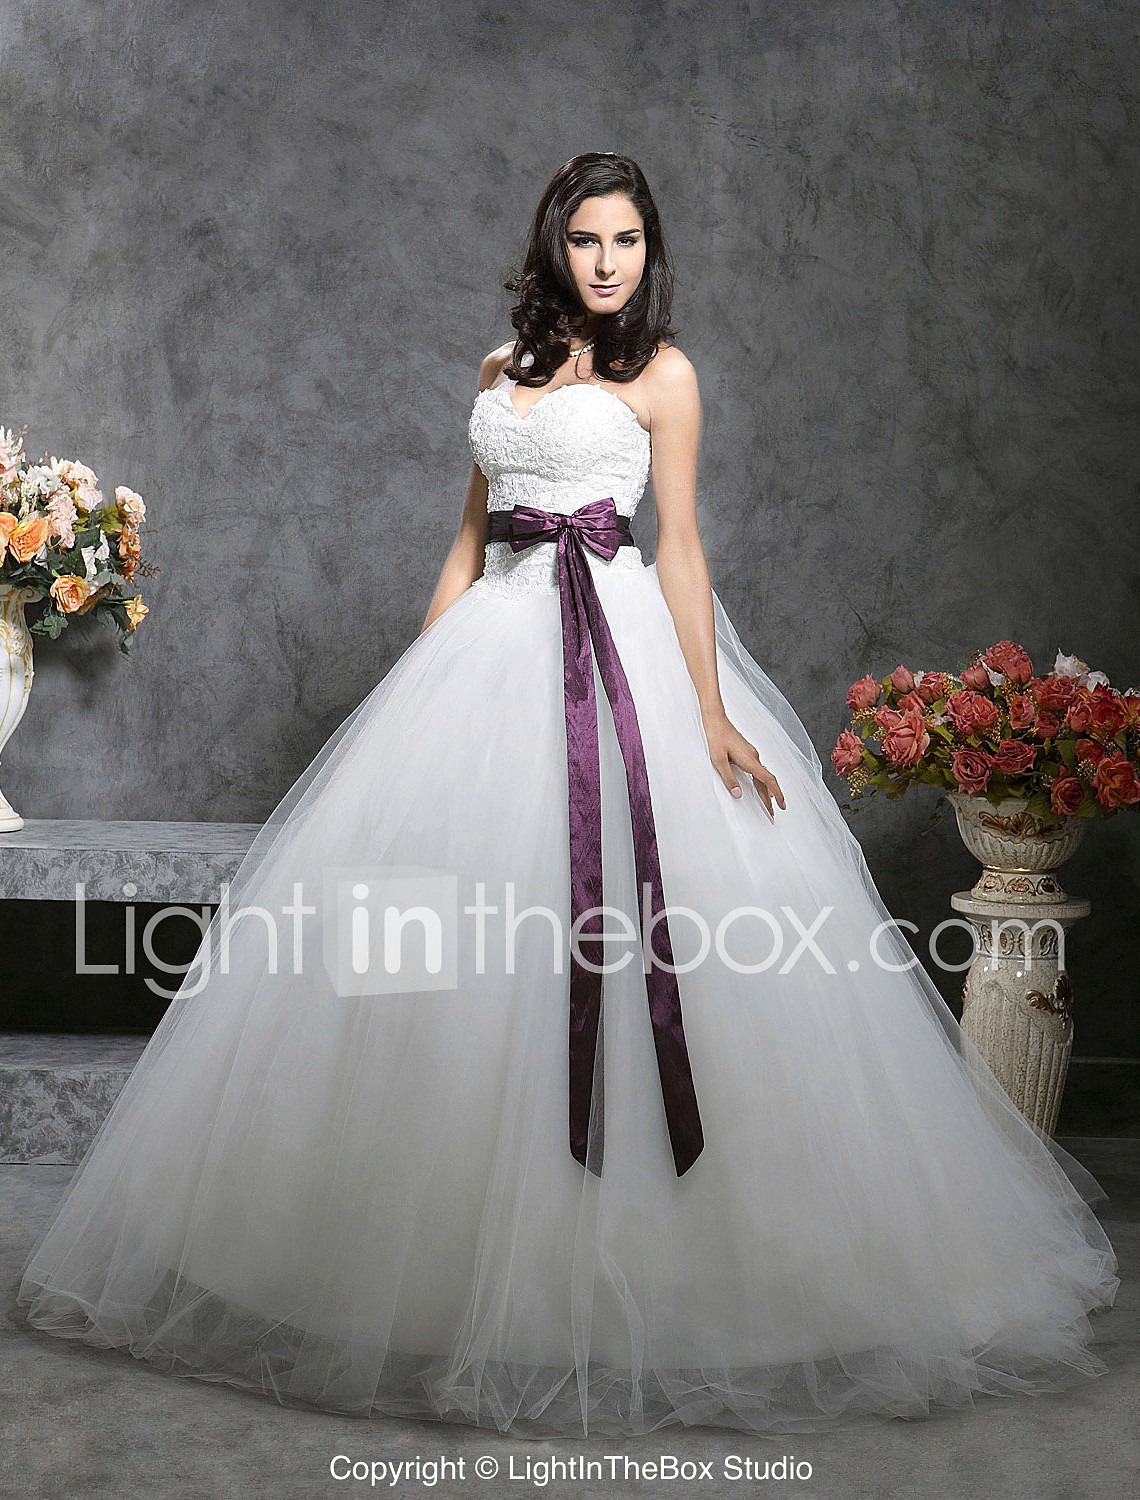 poofy wedding dresses with long trains